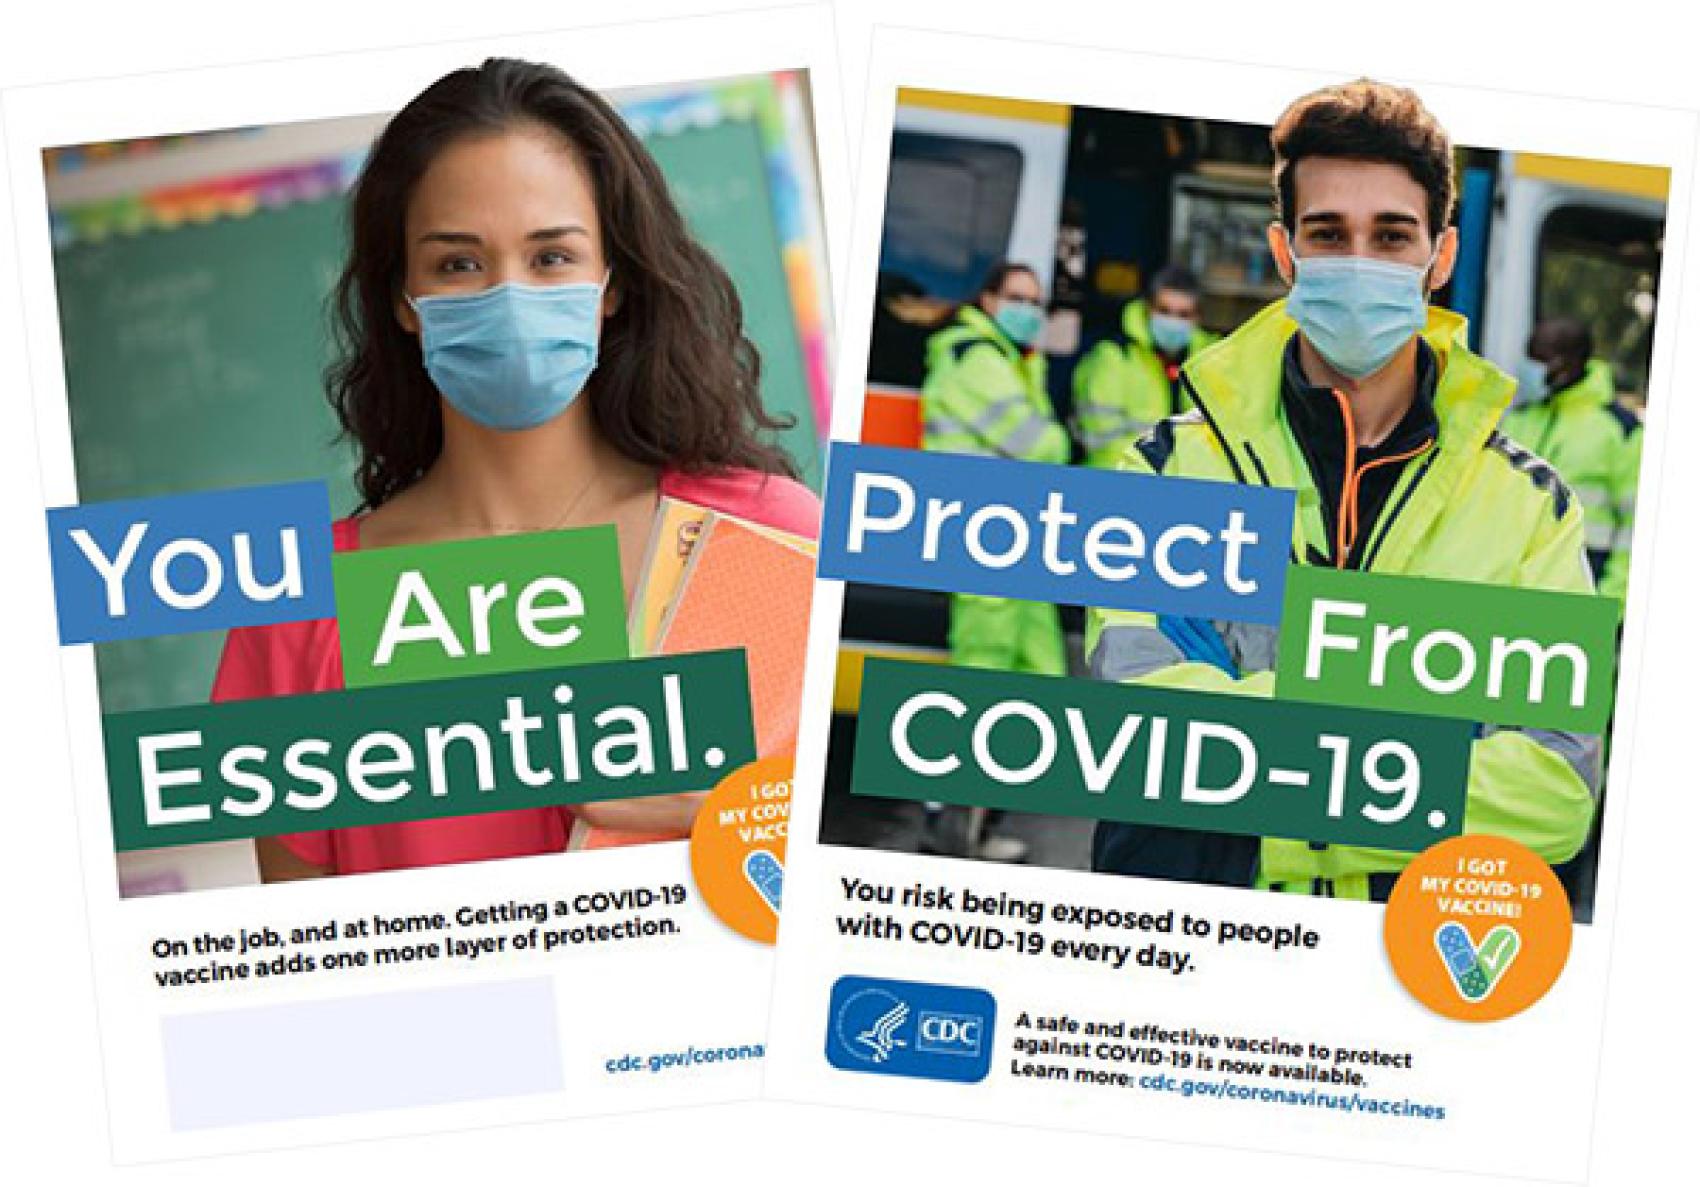 CDC posters